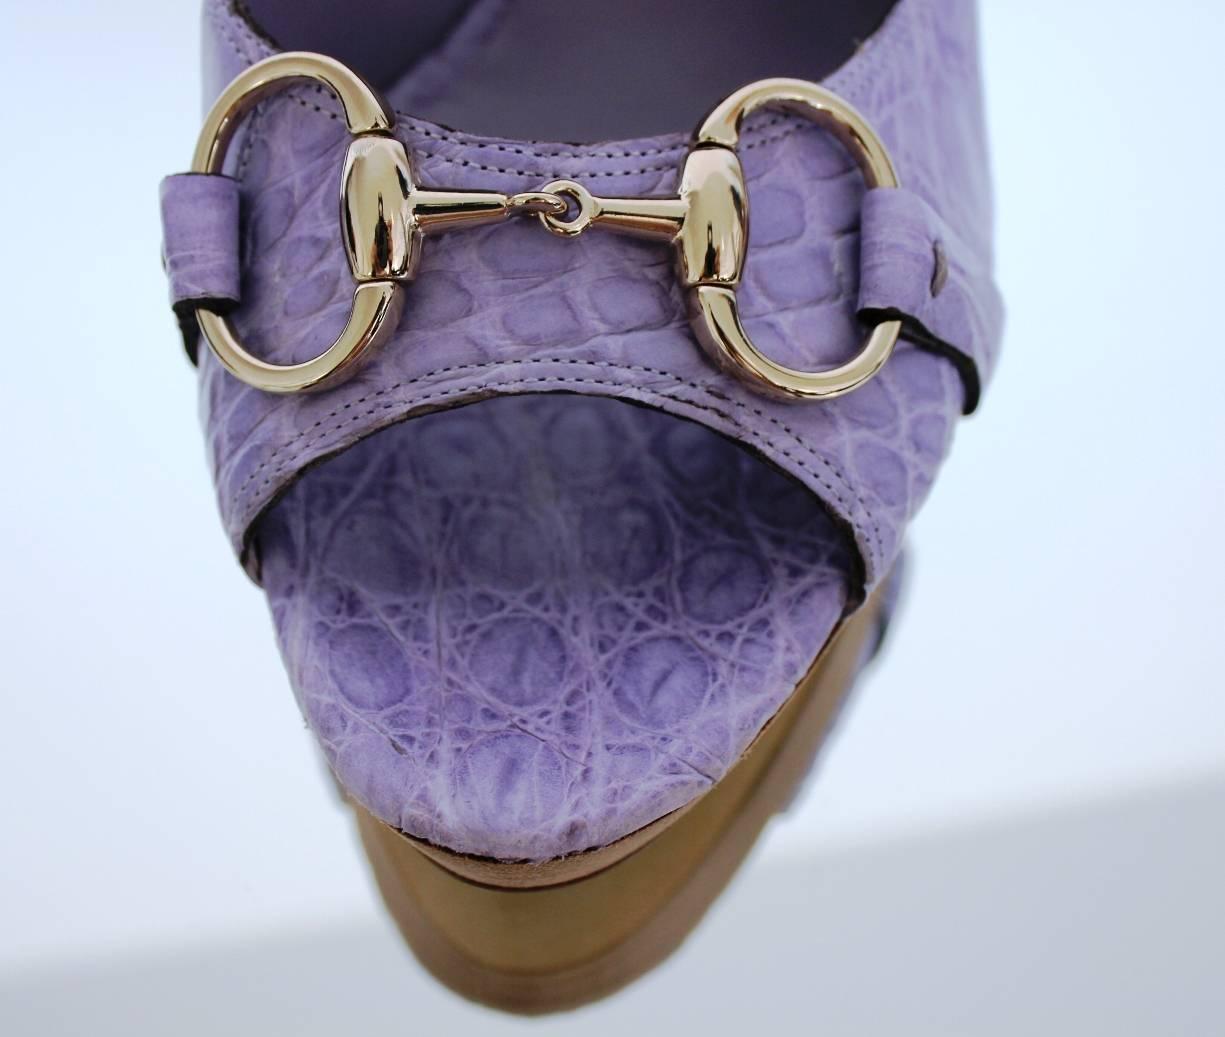 GORGEOUS GUCCI LILAC PLATFORM HIGH HEEL PEEP TOE

MADE OUT OF REAL CROCODILE SKIN - NO PRINT!

DETAILS:

    A GUCCI signature piece that will last you for years
    Perfect for the coming summer
    With light-gold hardware
    Typical horsebit